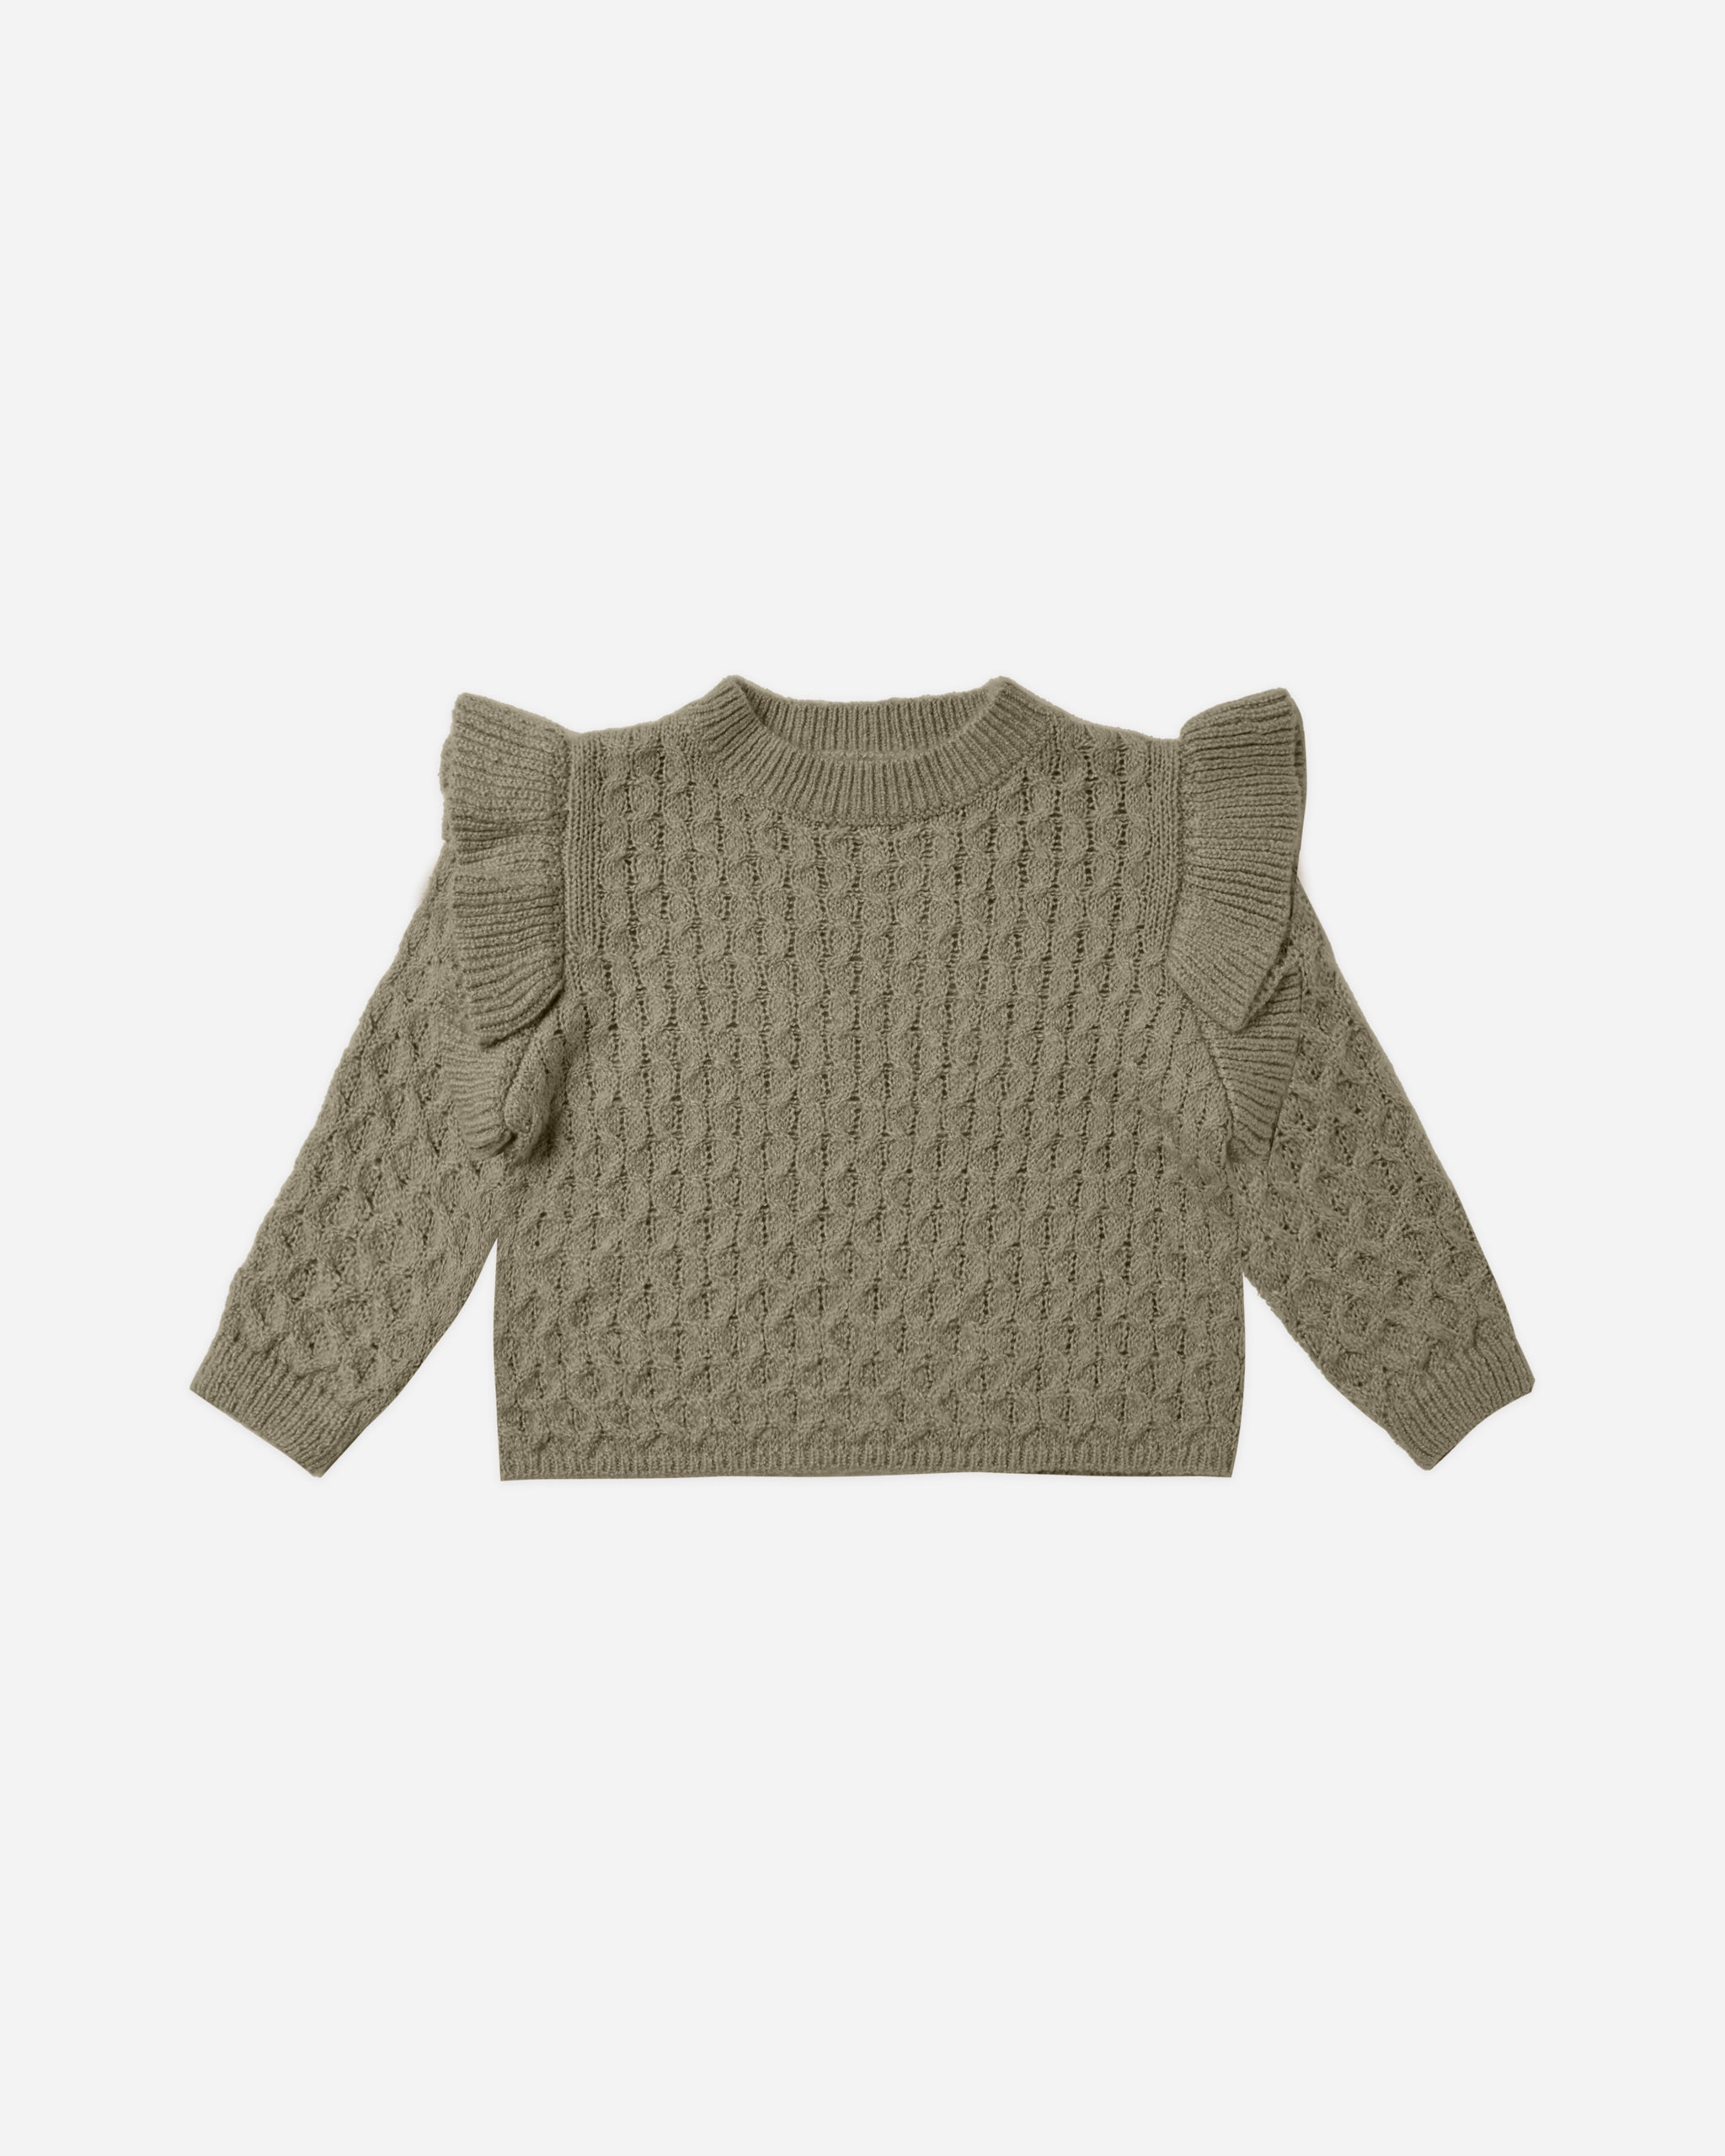 La Reina Sweater || Fern - Rylee + Cru | Kids Clothes | Trendy Baby Clothes | Modern Infant Outfits |